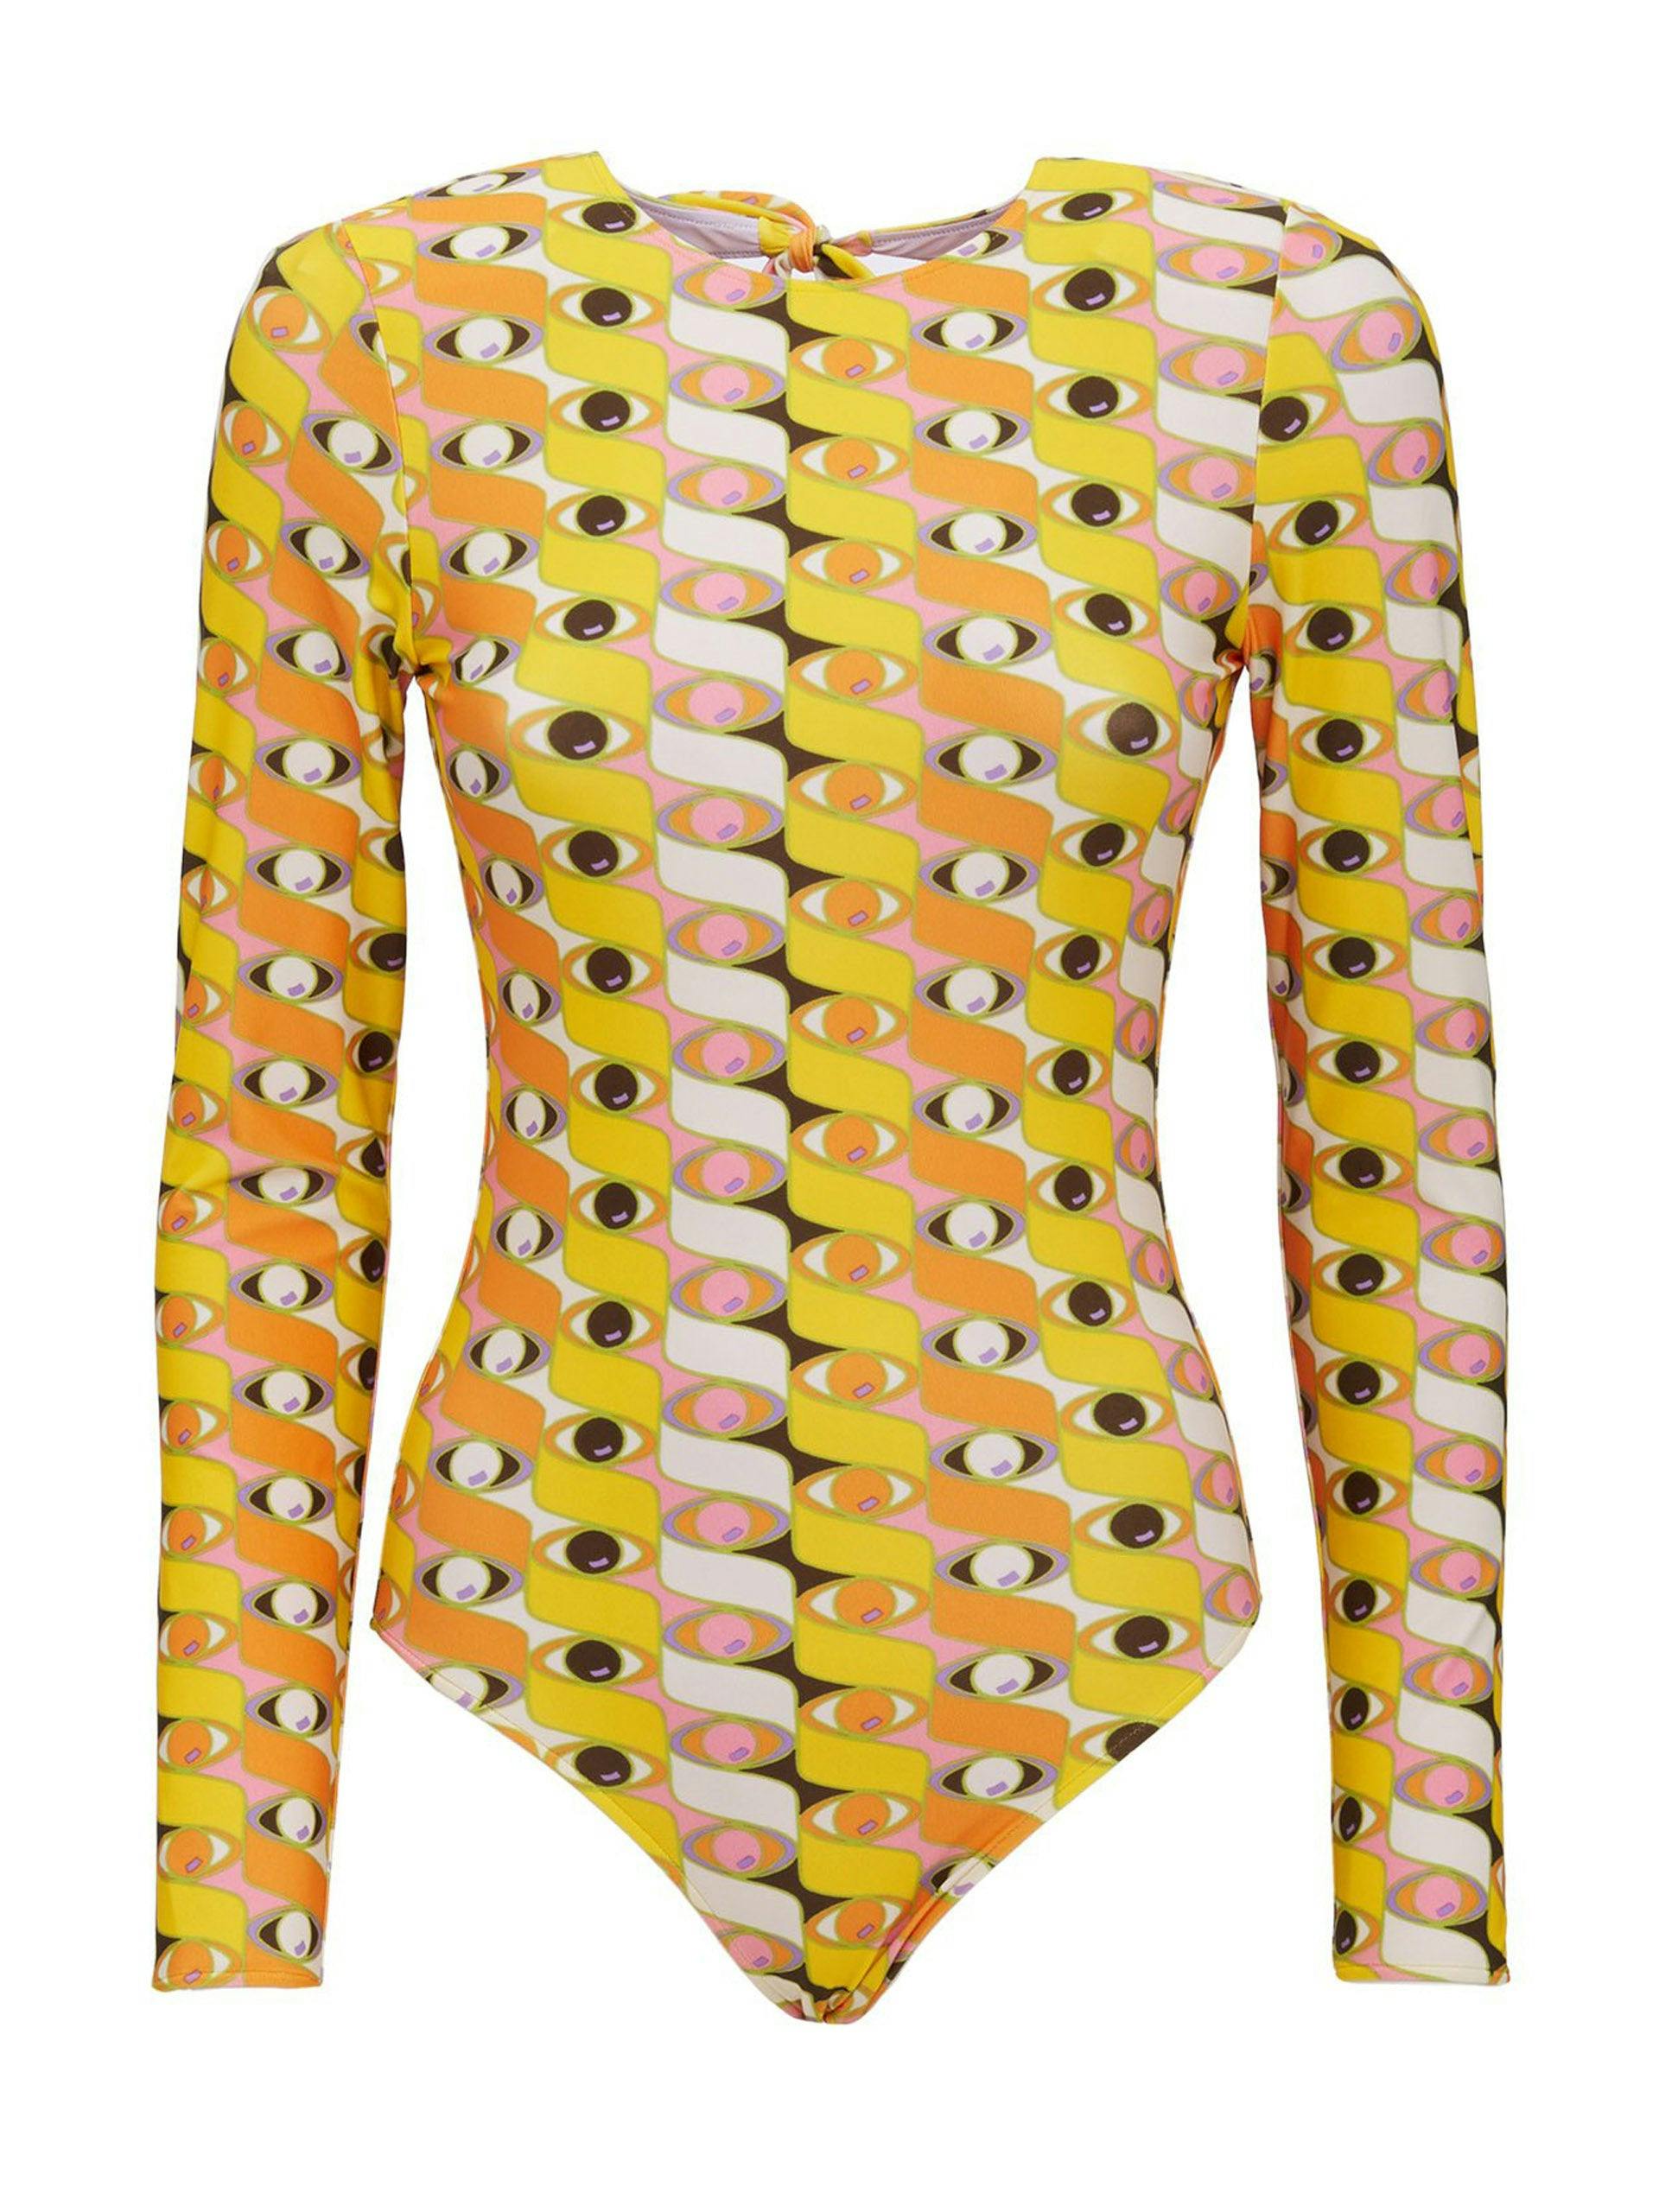 Third Eye surf suit in yellow